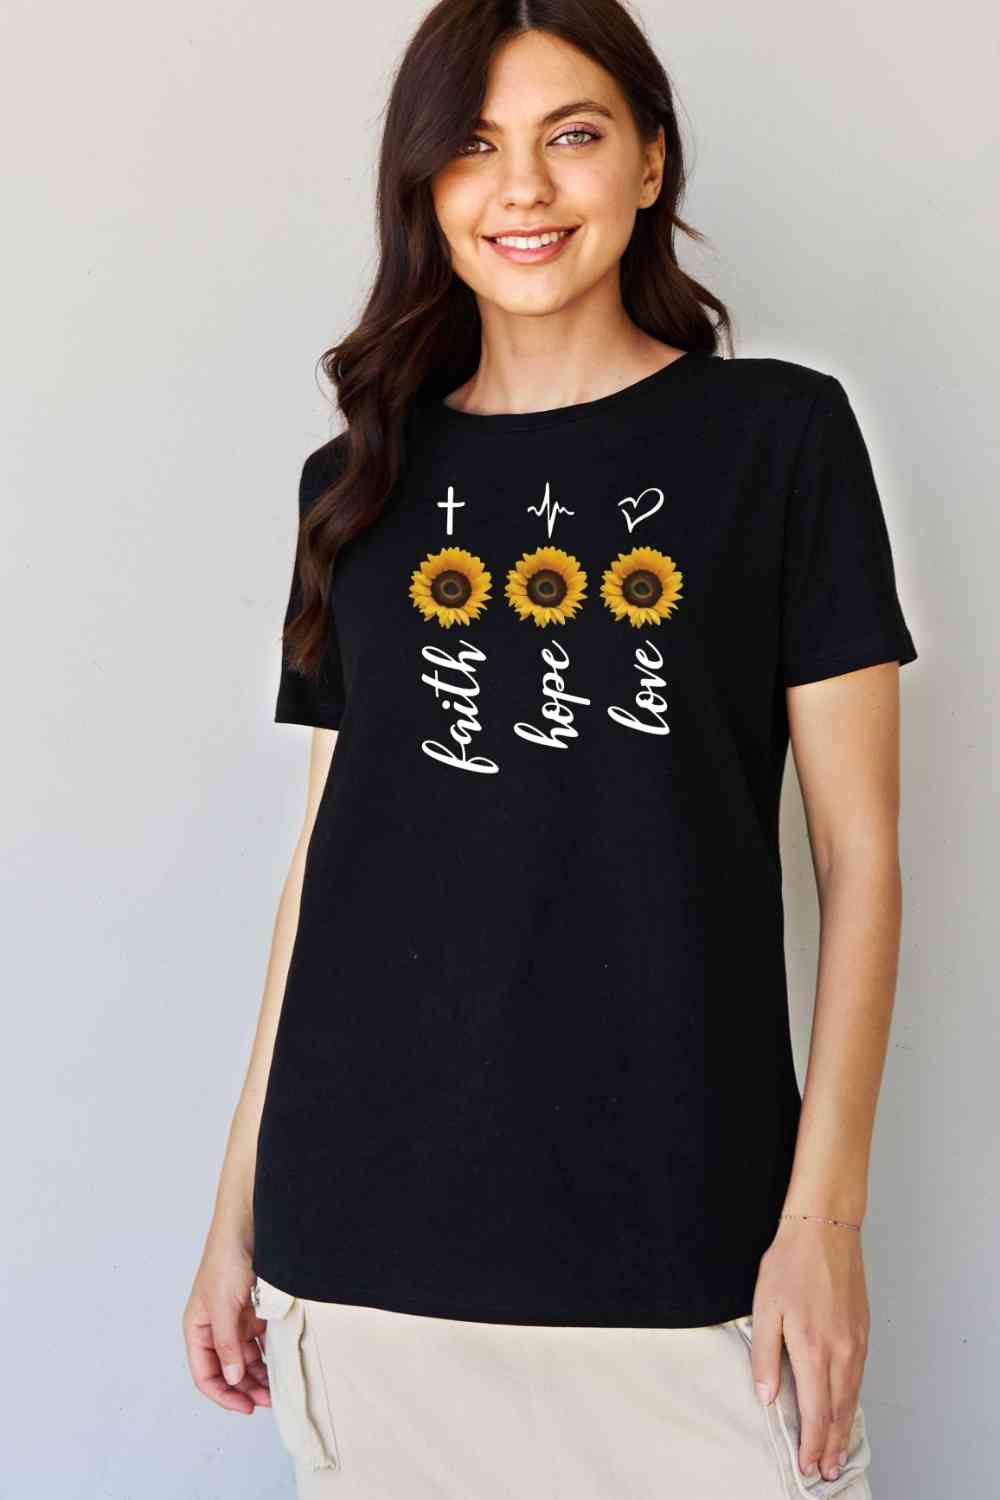 Simply Love Full Size Sunflower Graphic T-Shirt BLUE ZONE PLANET